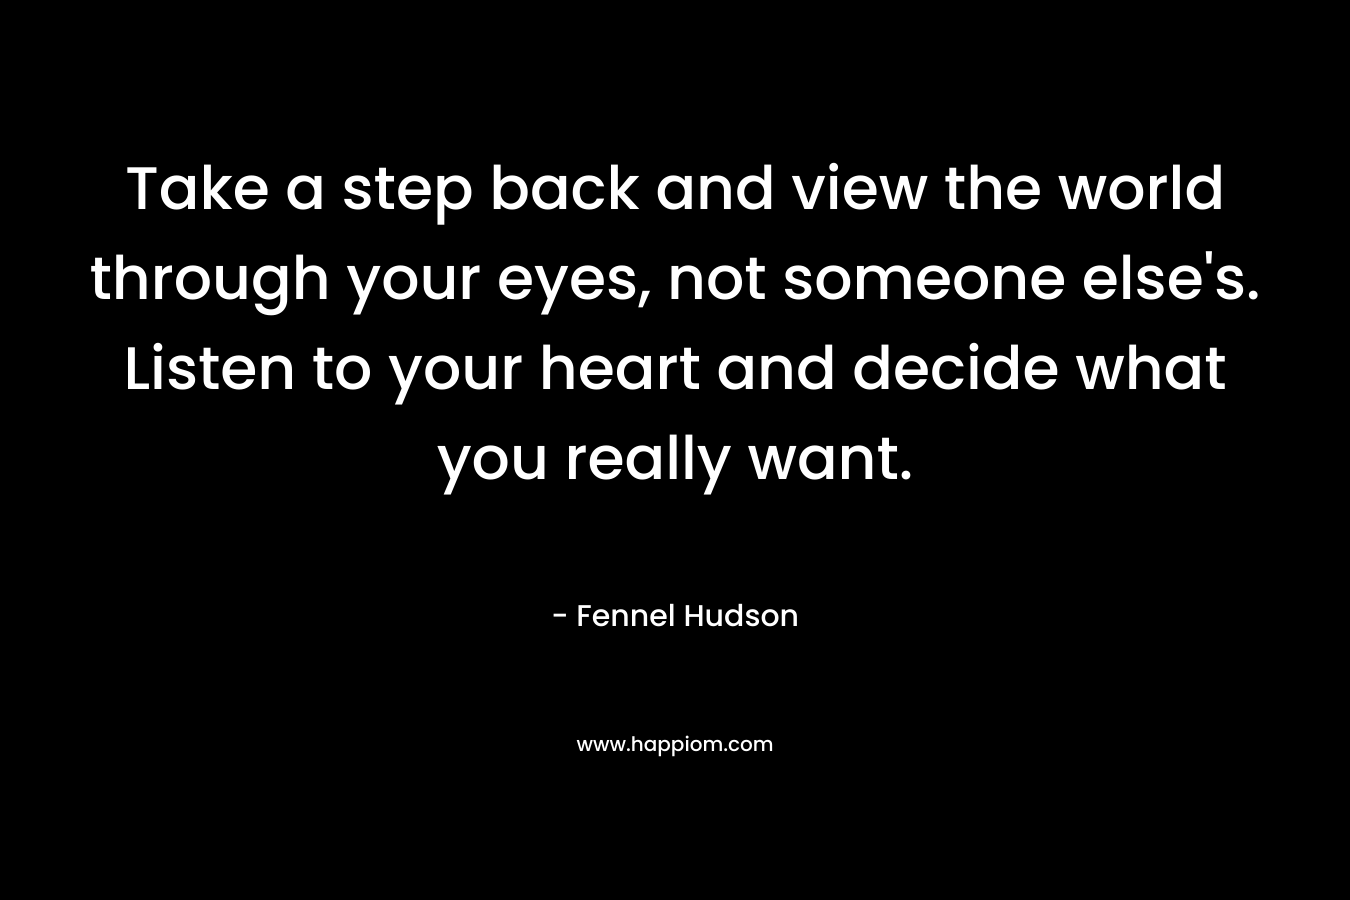 Take a step back and view the world through your eyes, not someone else’s. Listen to your heart and decide what you really want. – Fennel Hudson